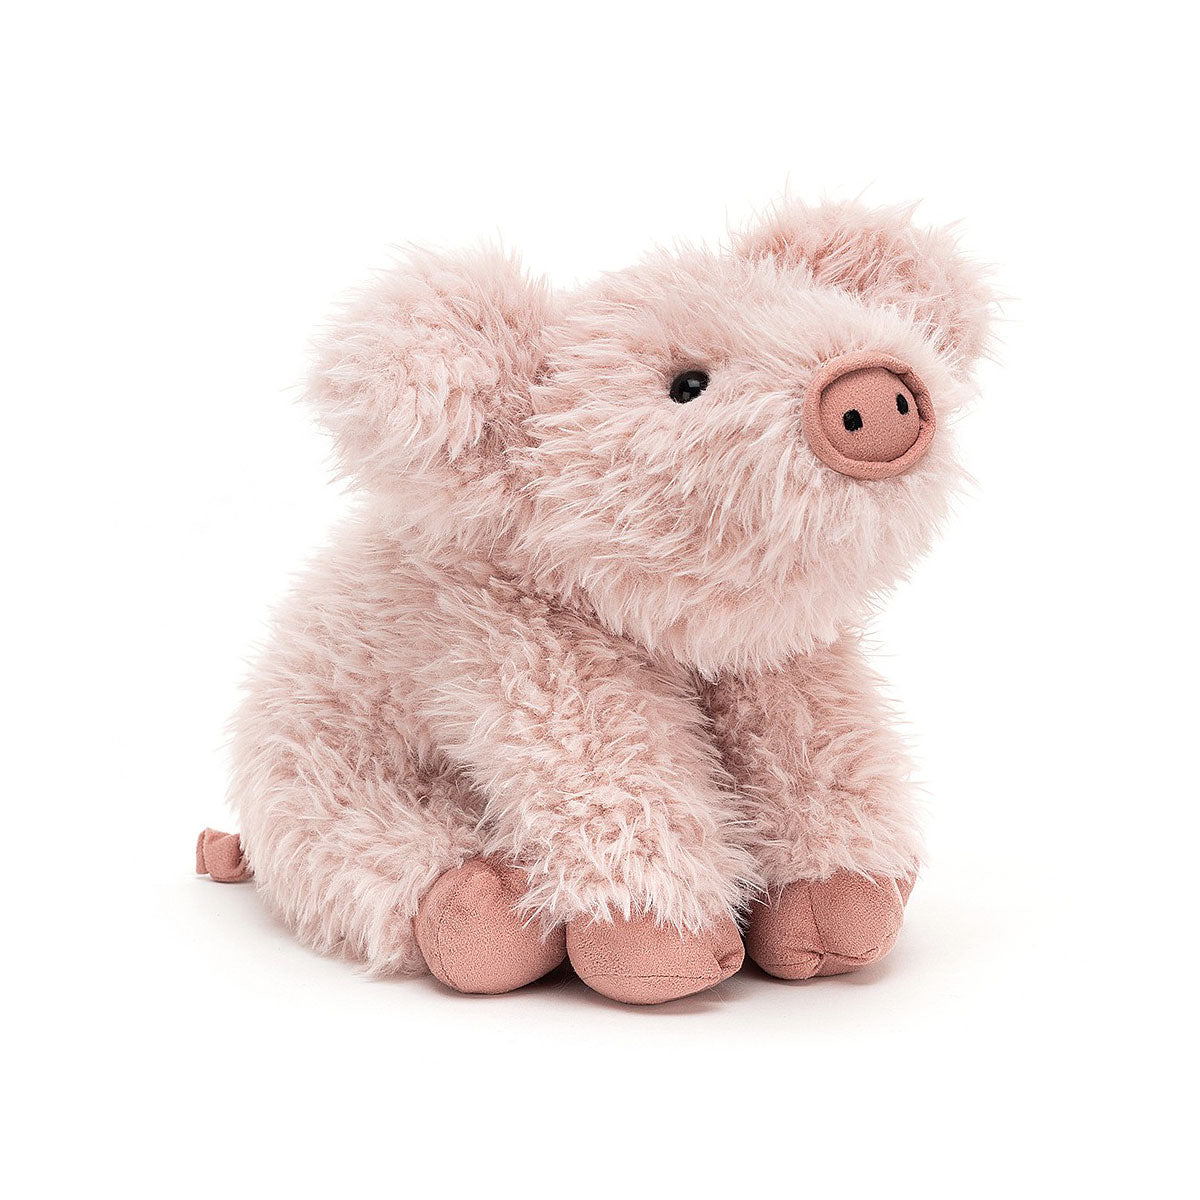 Curvie Pig from Jellycat